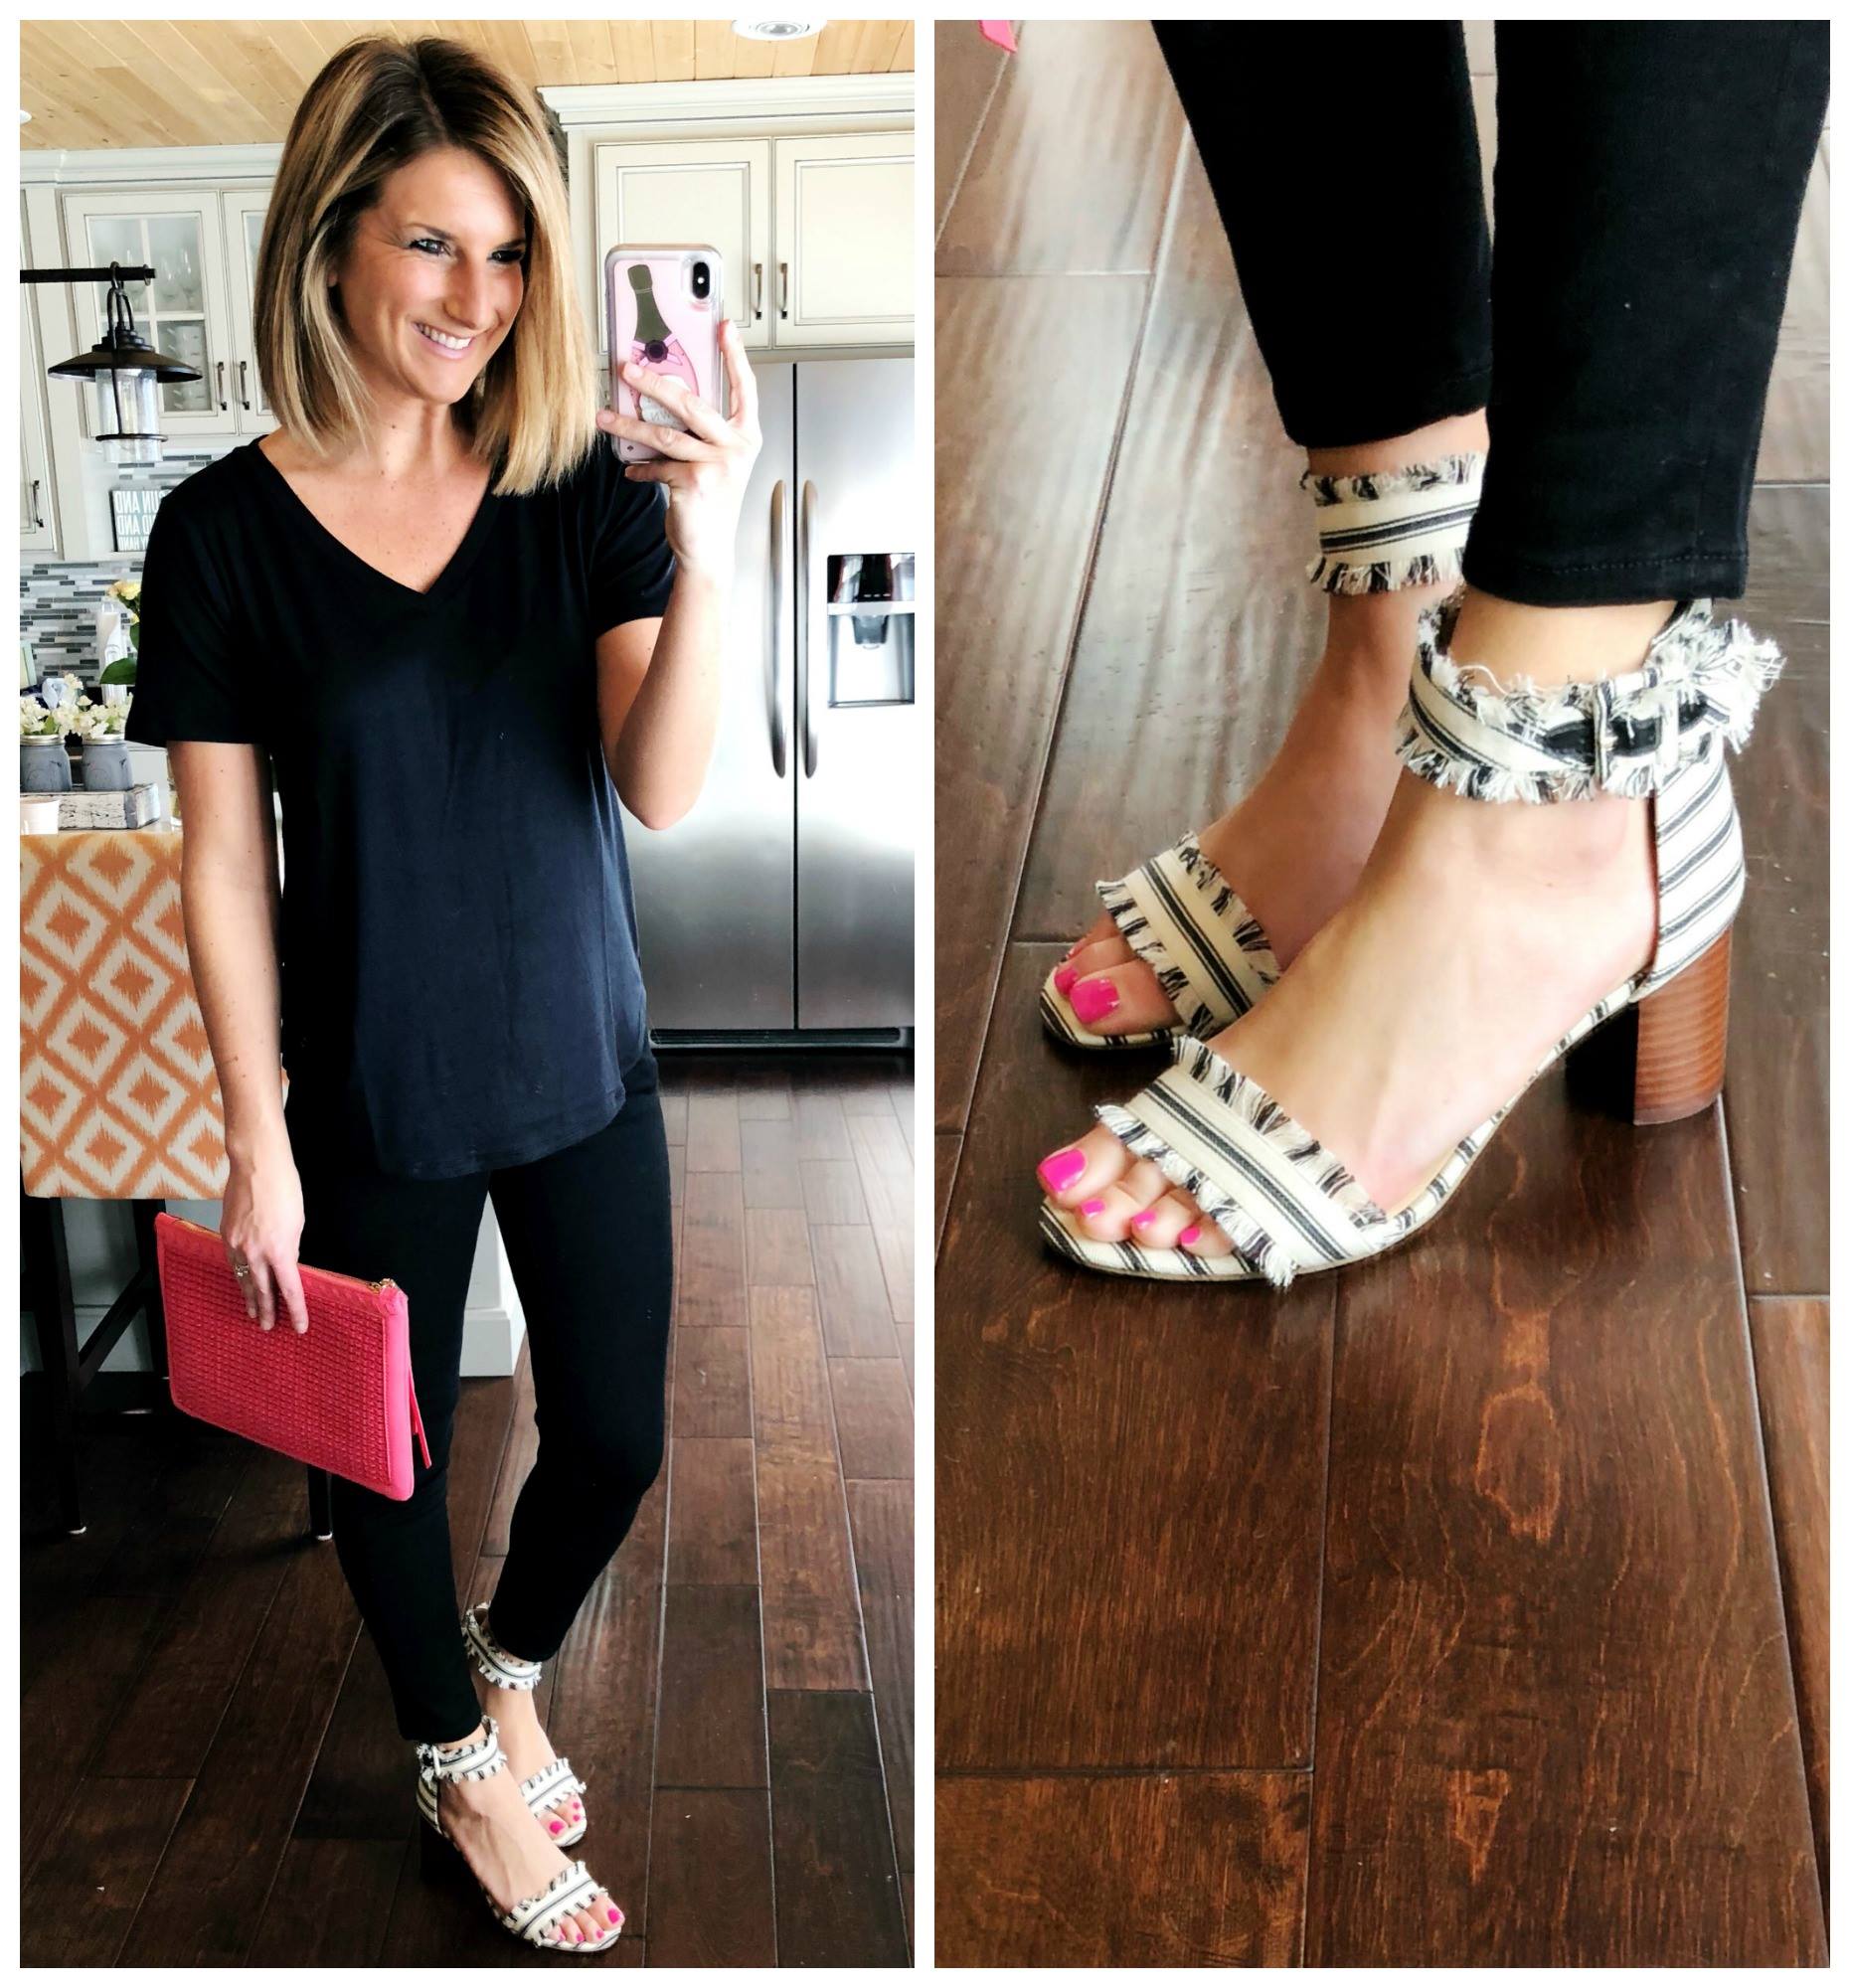 Date Night Outfit // Perfect V Neck Tee + Black Skinny Jeans + Black and White Striped Sandals + Statement Clutch // Girls Night Out Outfit // Spring Fashion